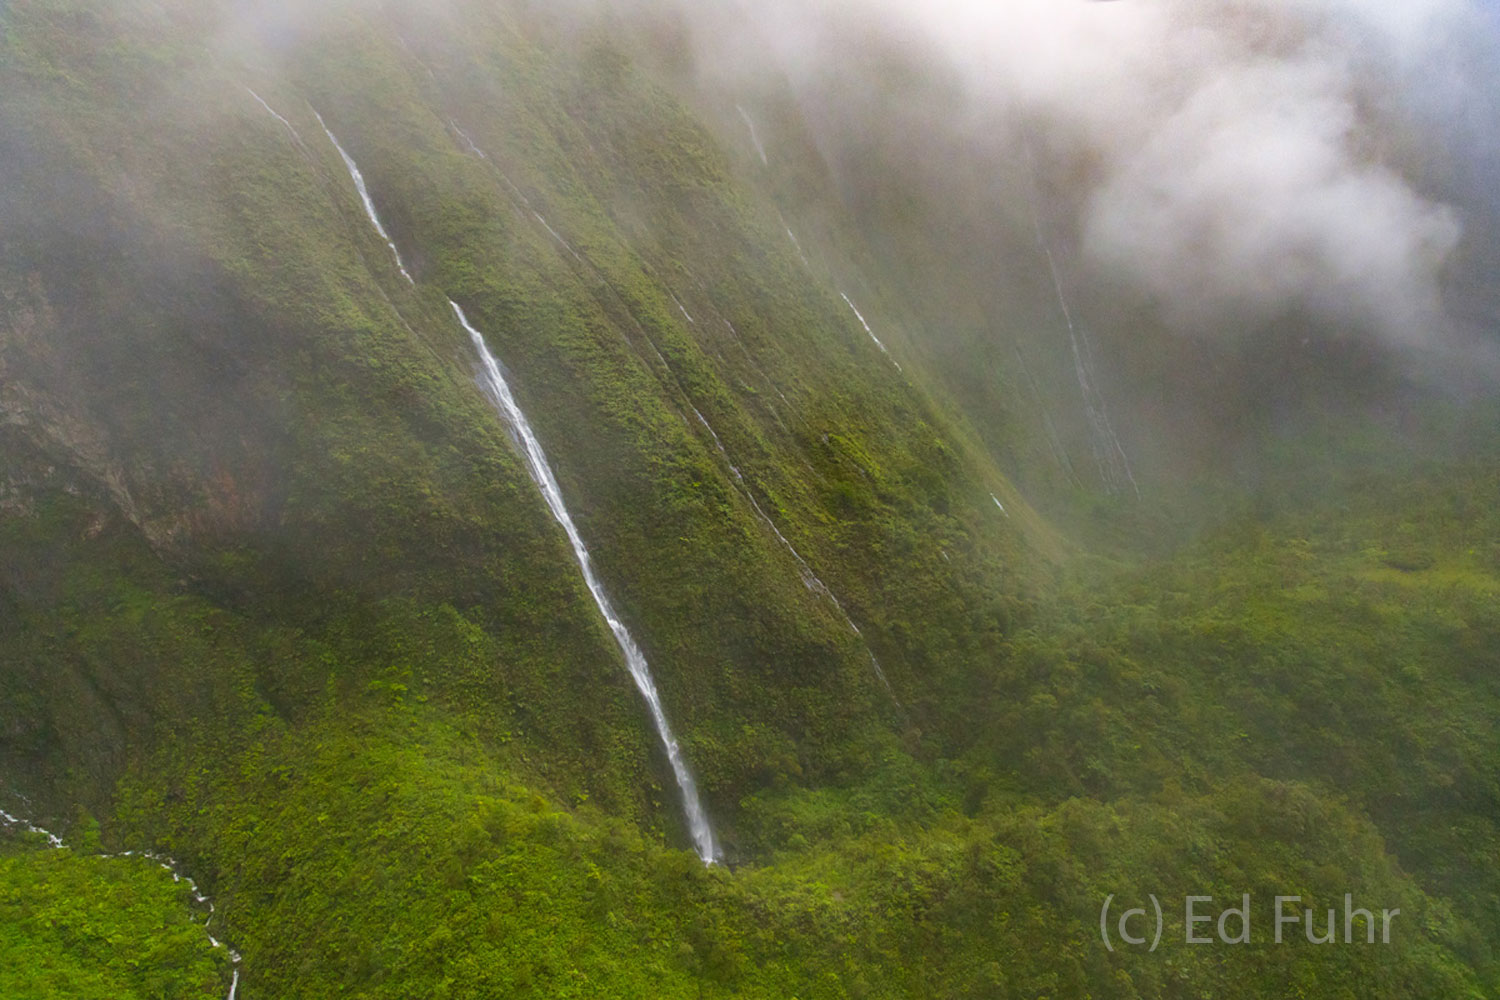 Yet another storm lifts above waterfalls tumbling into Kauai's valleys.